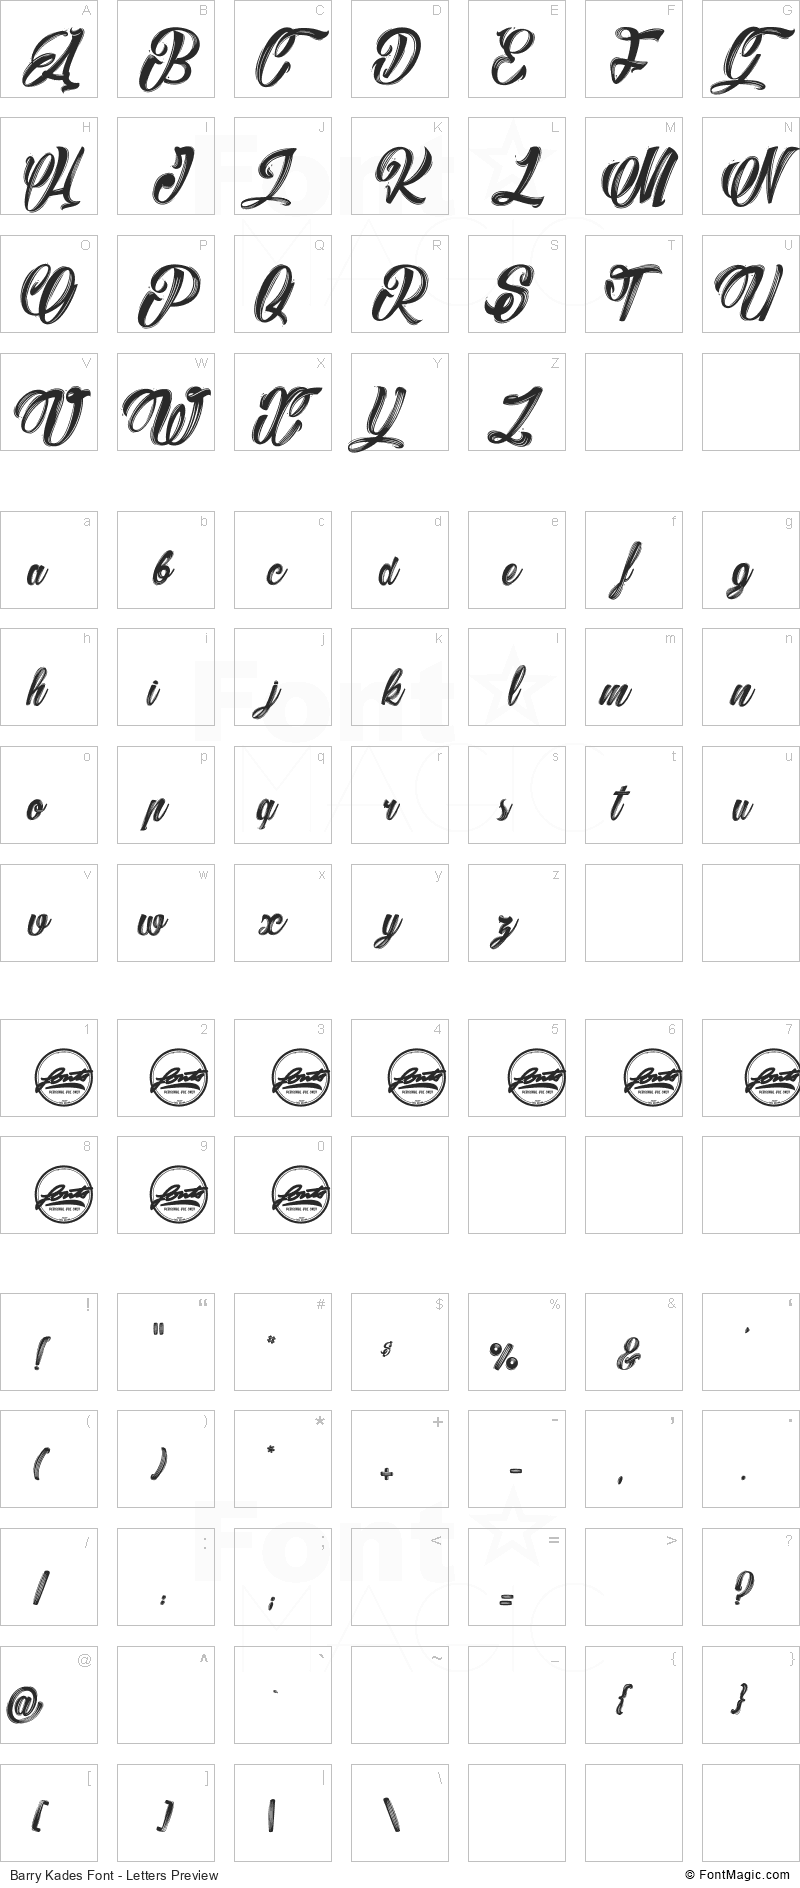 Barry Kades Font - All Latters Preview Chart